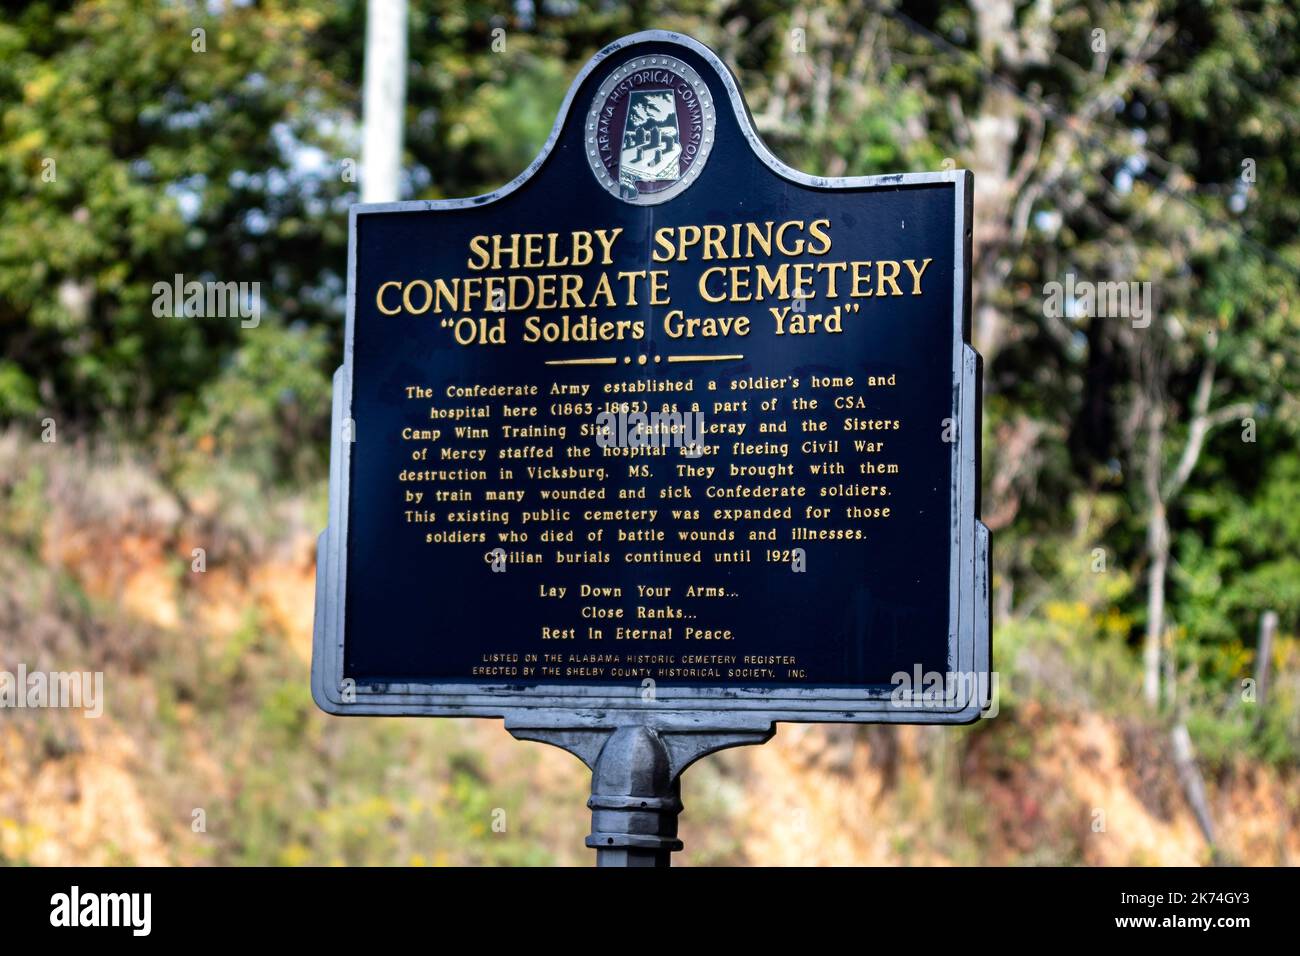 Calera, Alabama, USA-Sept. 30, 2022: Historical marker for the Shelby Springs Confederate Cemetery in Shelby County. Stock Photo